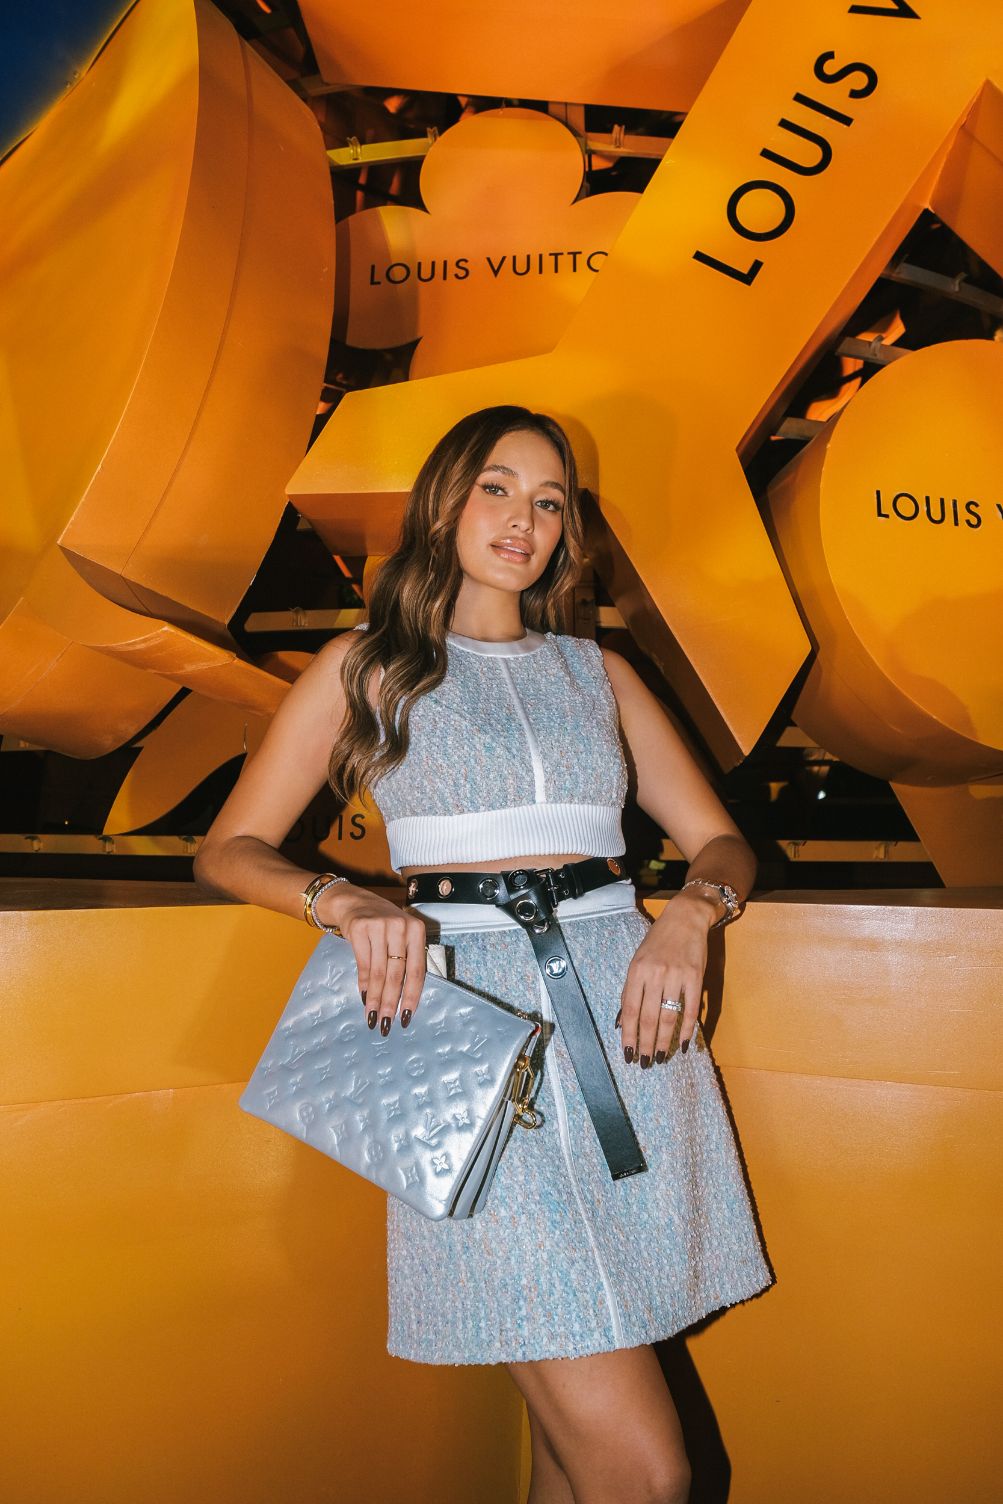 L'Officiel Philippines on X: #LouisVuitton ushers in the festive season by  bringing together stylish personalities and notable society fixtures to  light up the first Louis Vuitton Christmas tree in the Philippines led